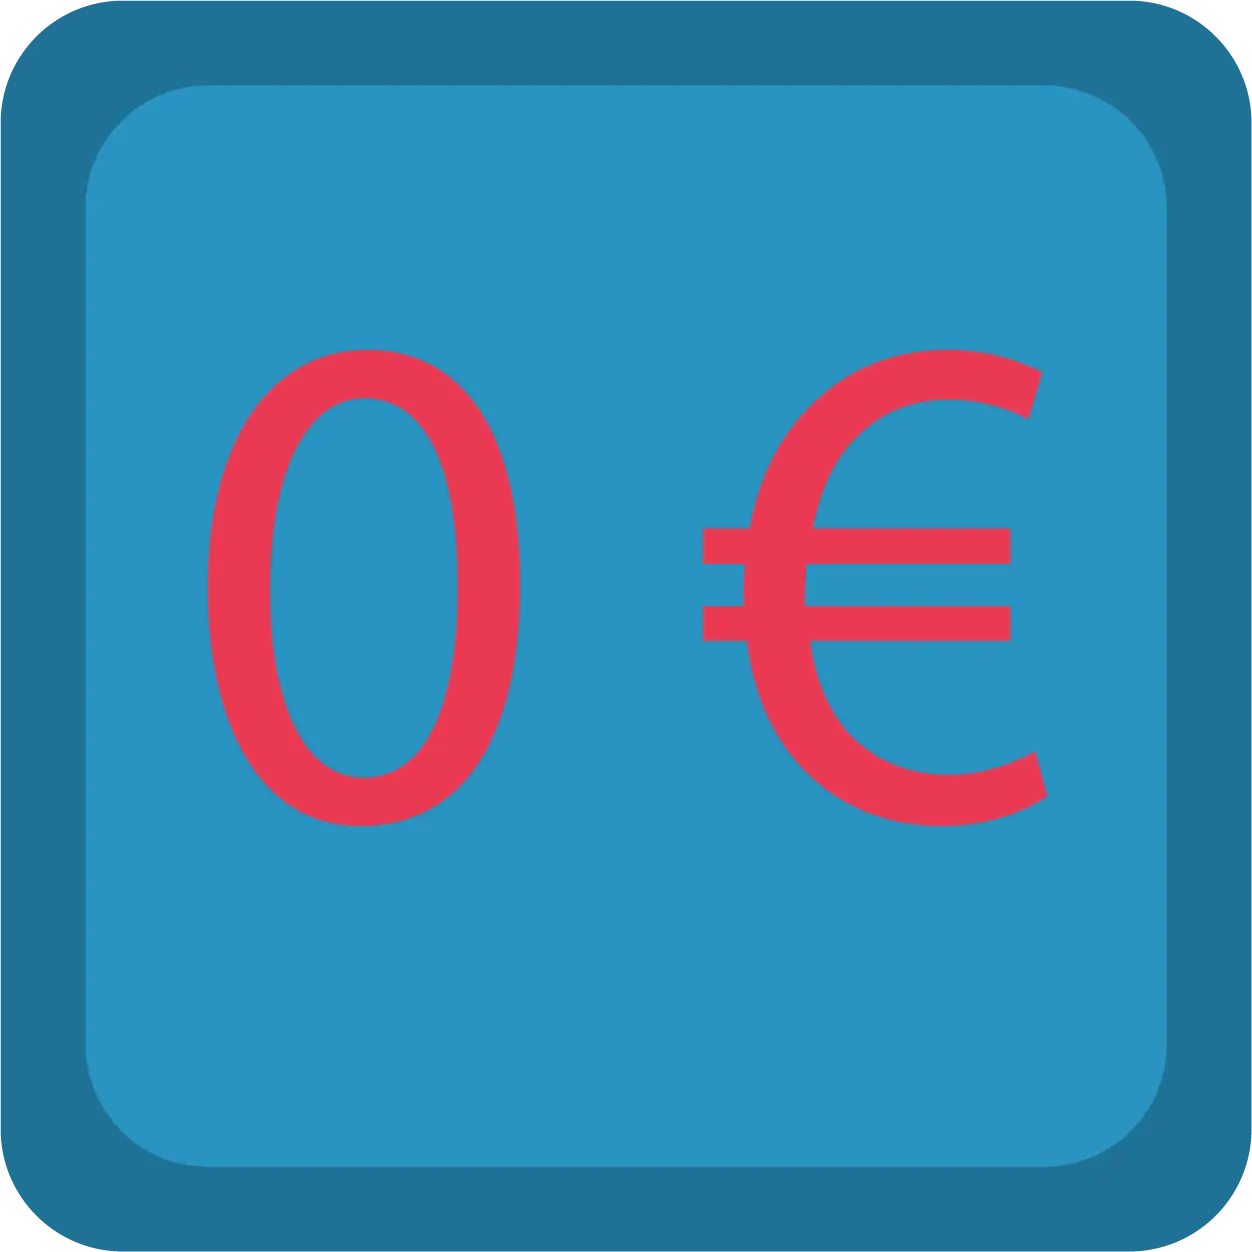 0 Euro in red on blue background